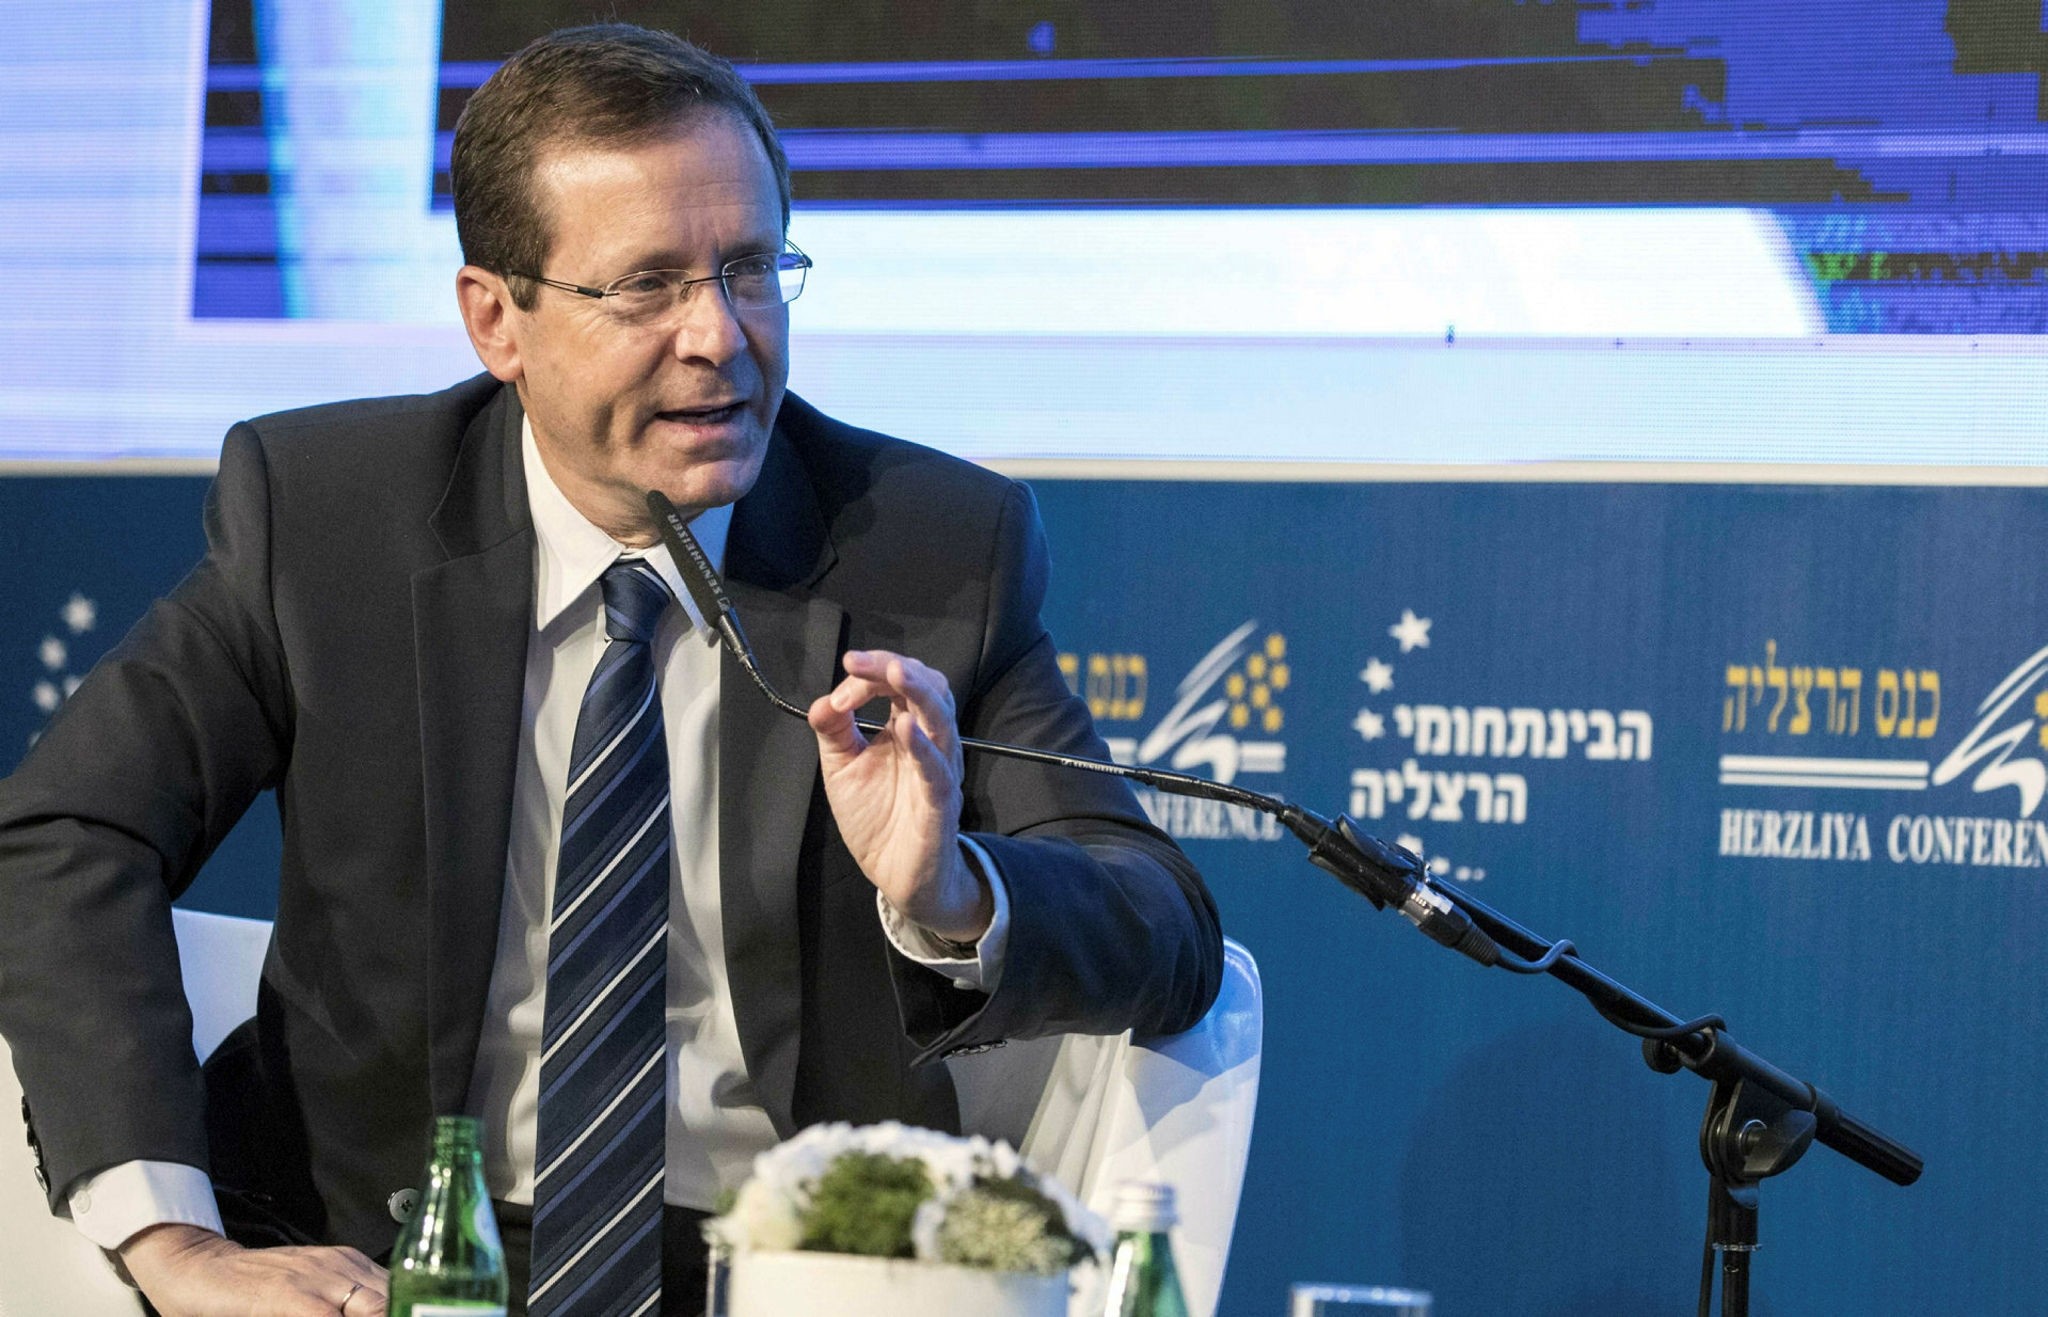 Zionist opposition leader Issac Herzog attends the annual Herzliya Conference on June 22, 2017 in the central Israeli city of Herzliya. (AFP Photo)